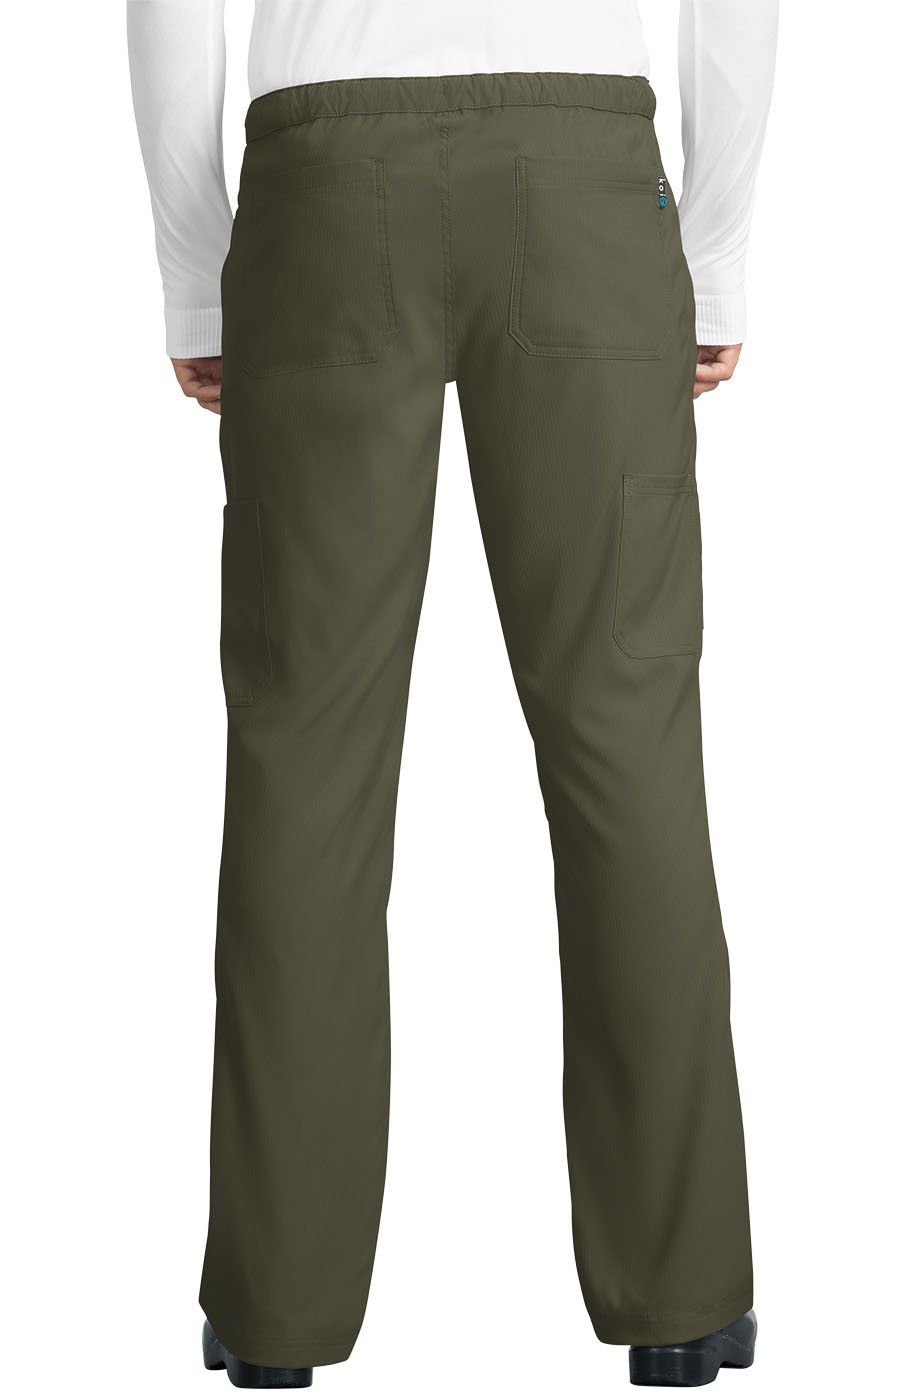 discovery-pant-olive-green